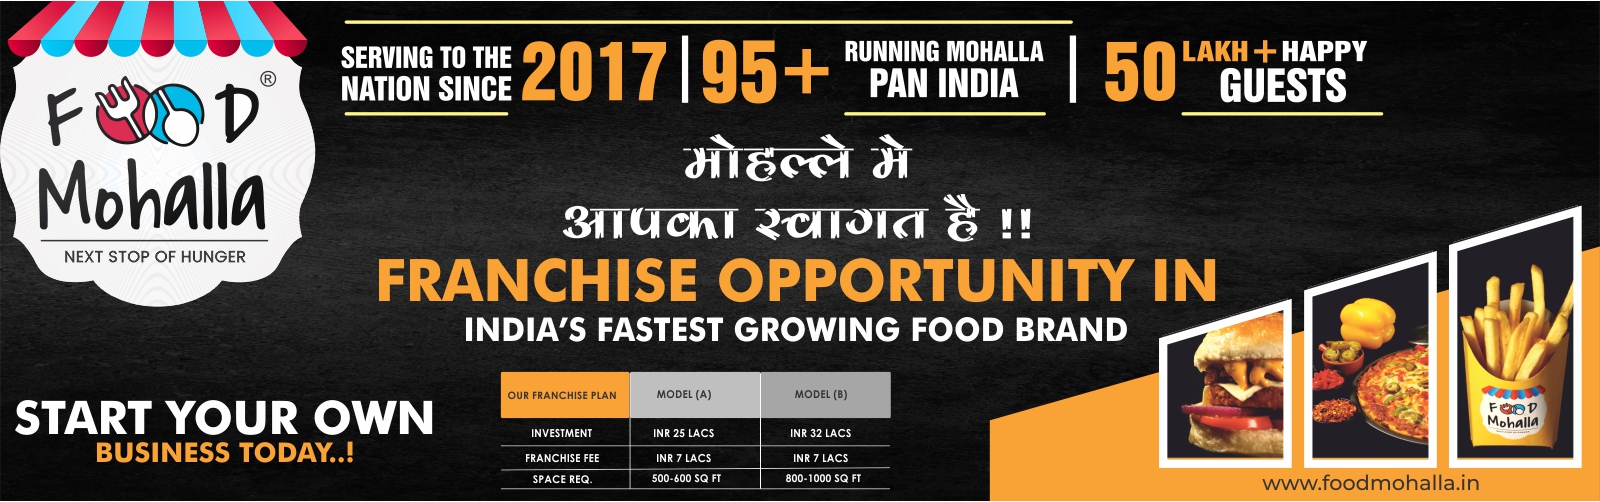 admin/uploads/brand_registration/Food Mohalla - Franchise Opportunity in Indias Fastest Growing Food Brand